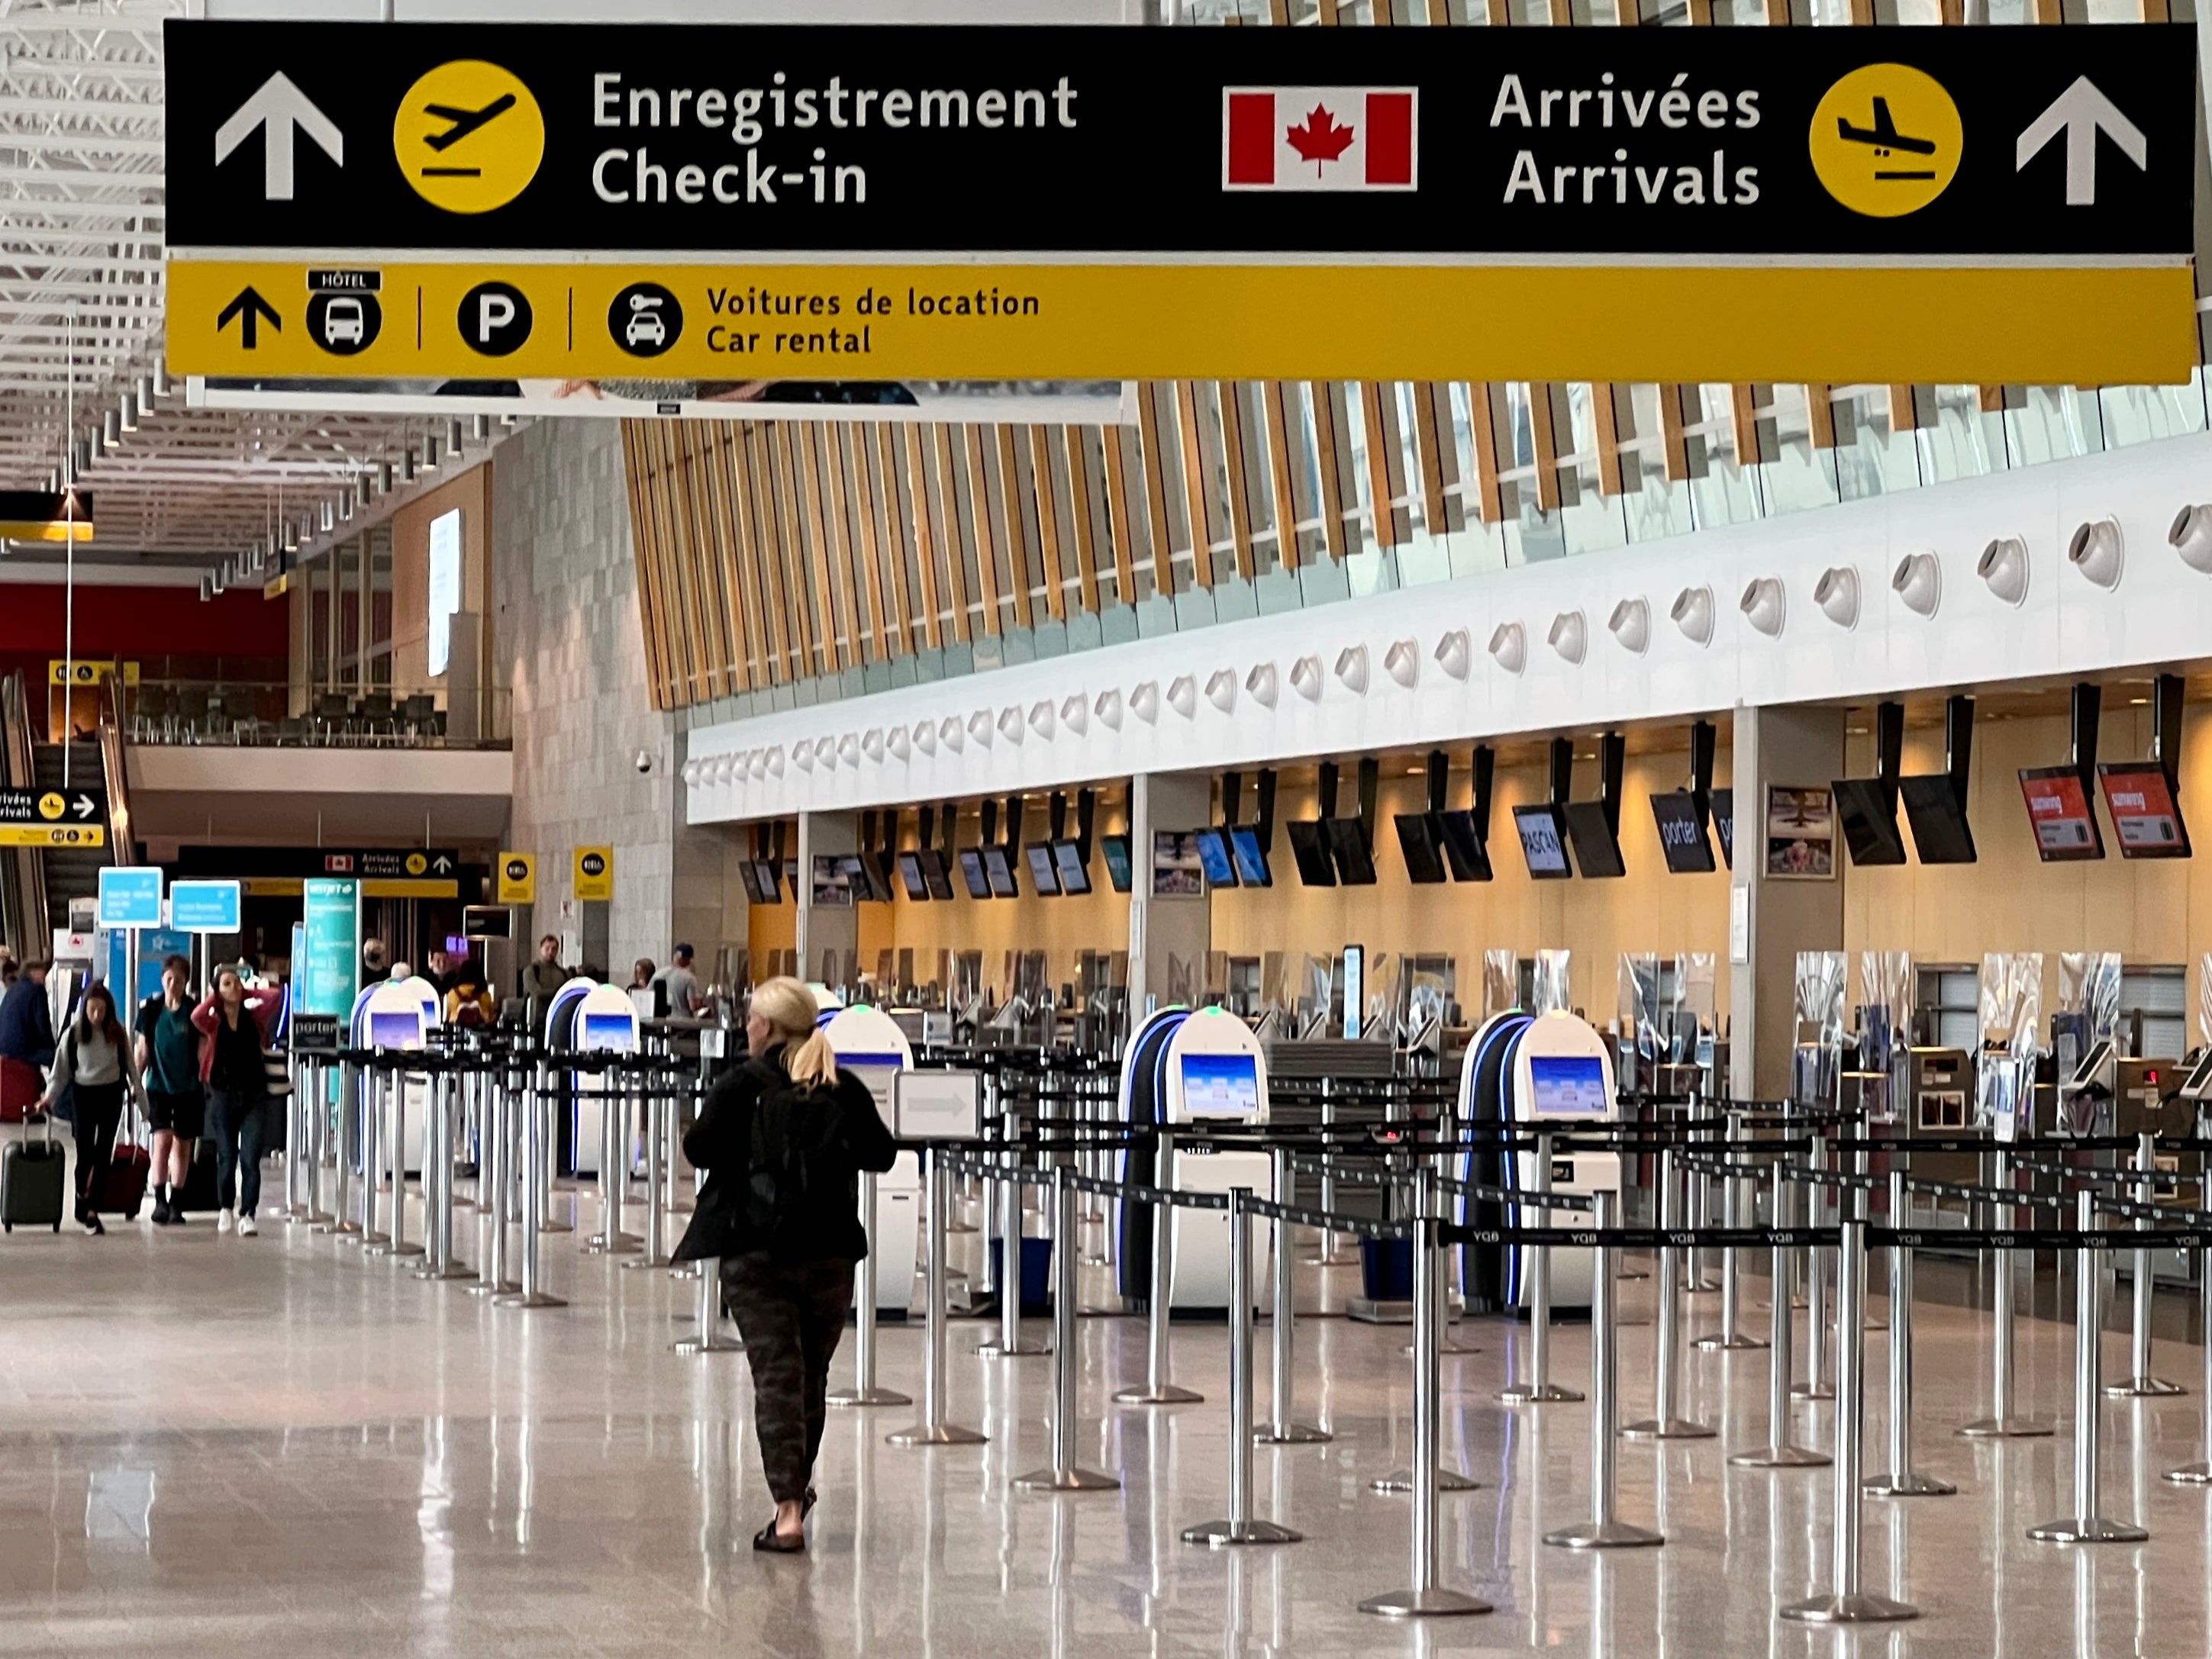 All clear: Quebec City airport, where random testing does not apply